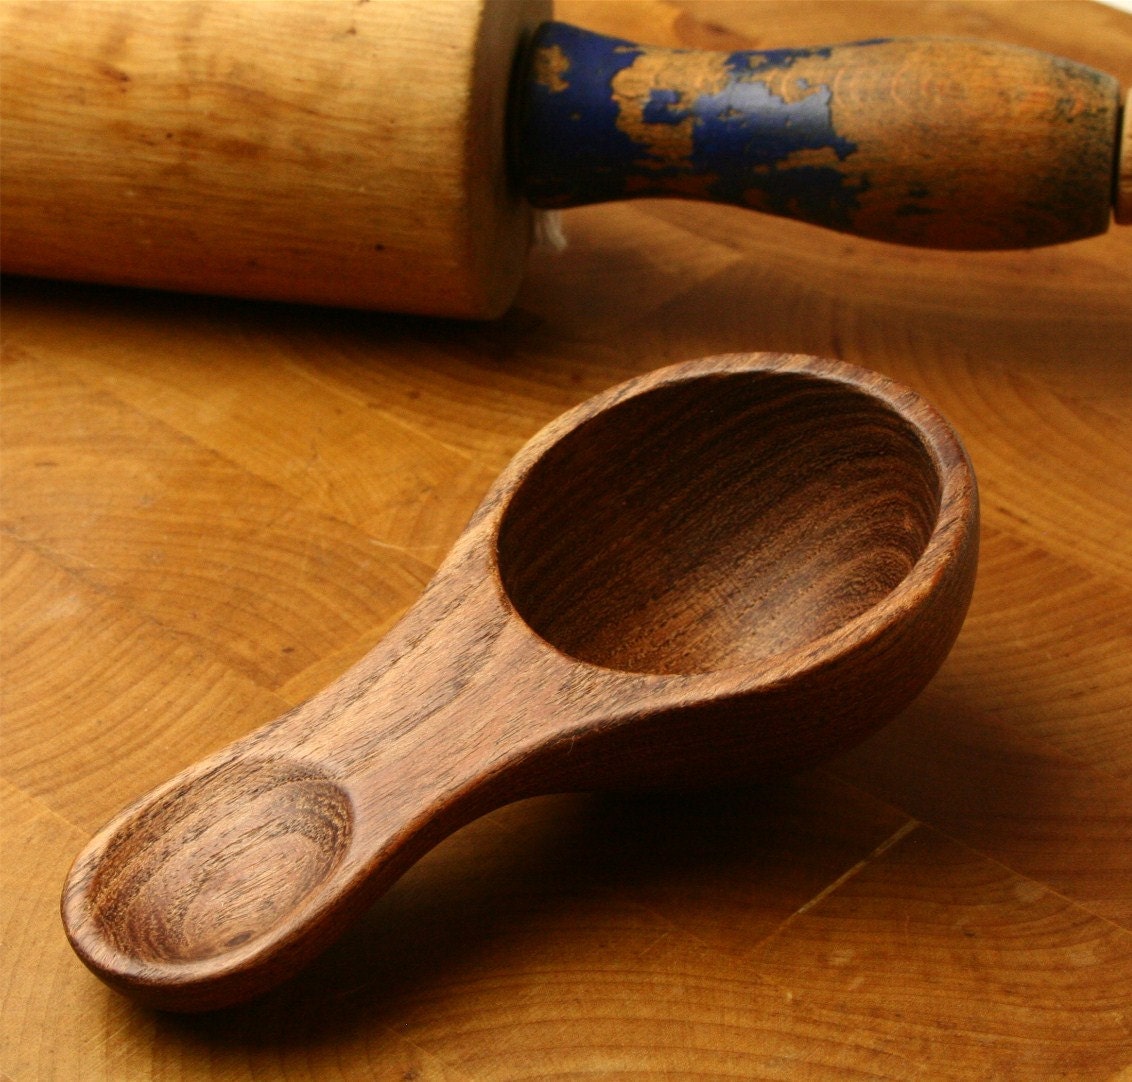 Handmade wooden spoon measuring spoon one eighth of a cup 2